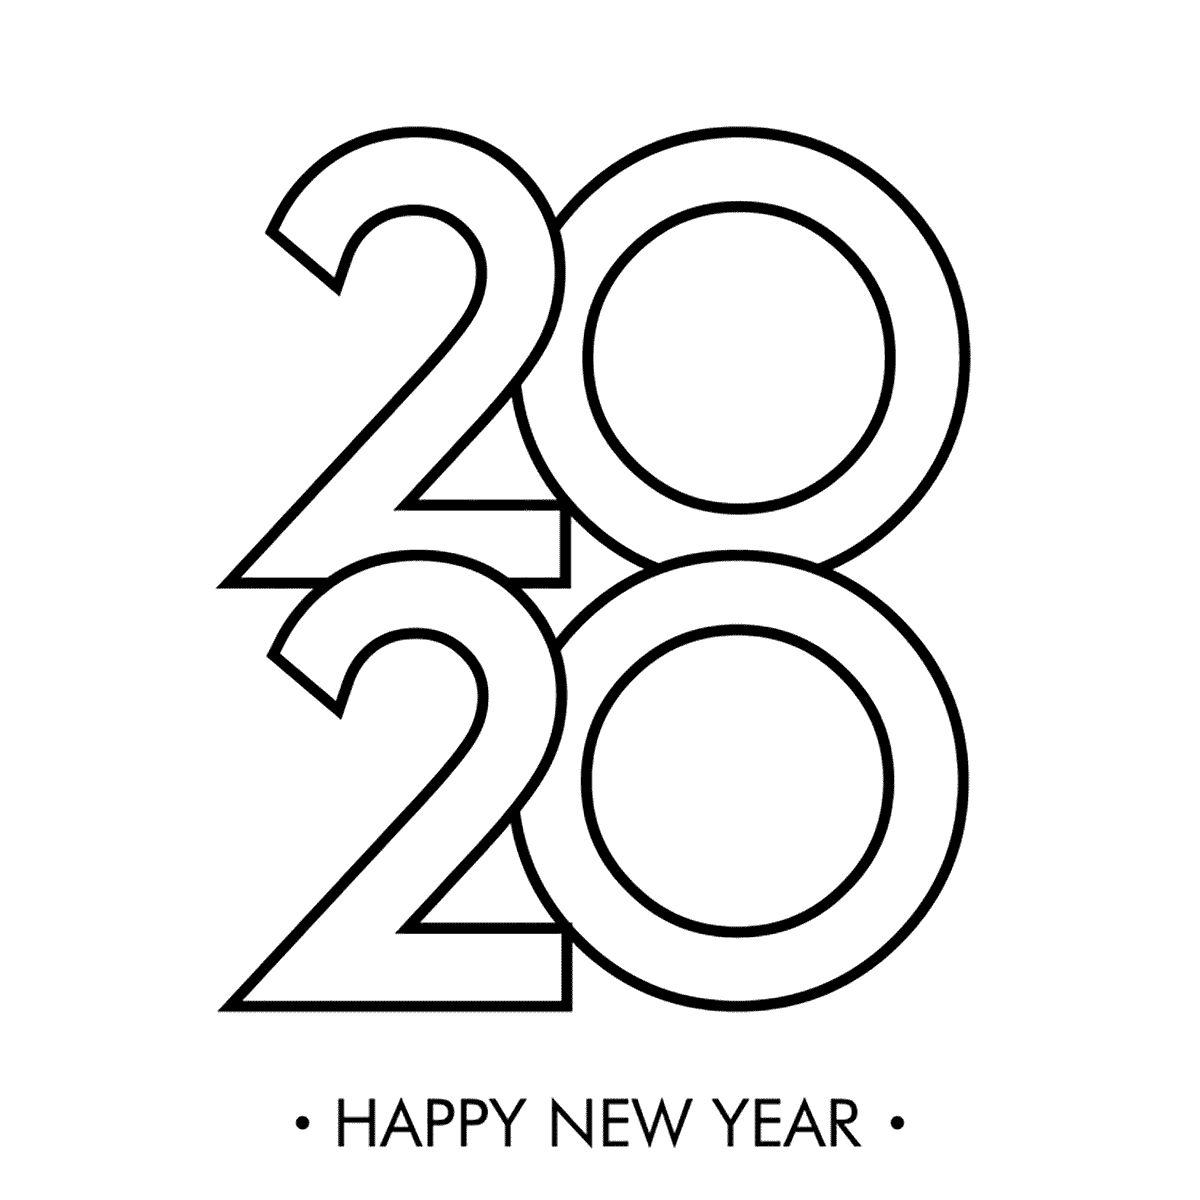 Easy 2020 Black And White Coloring Page